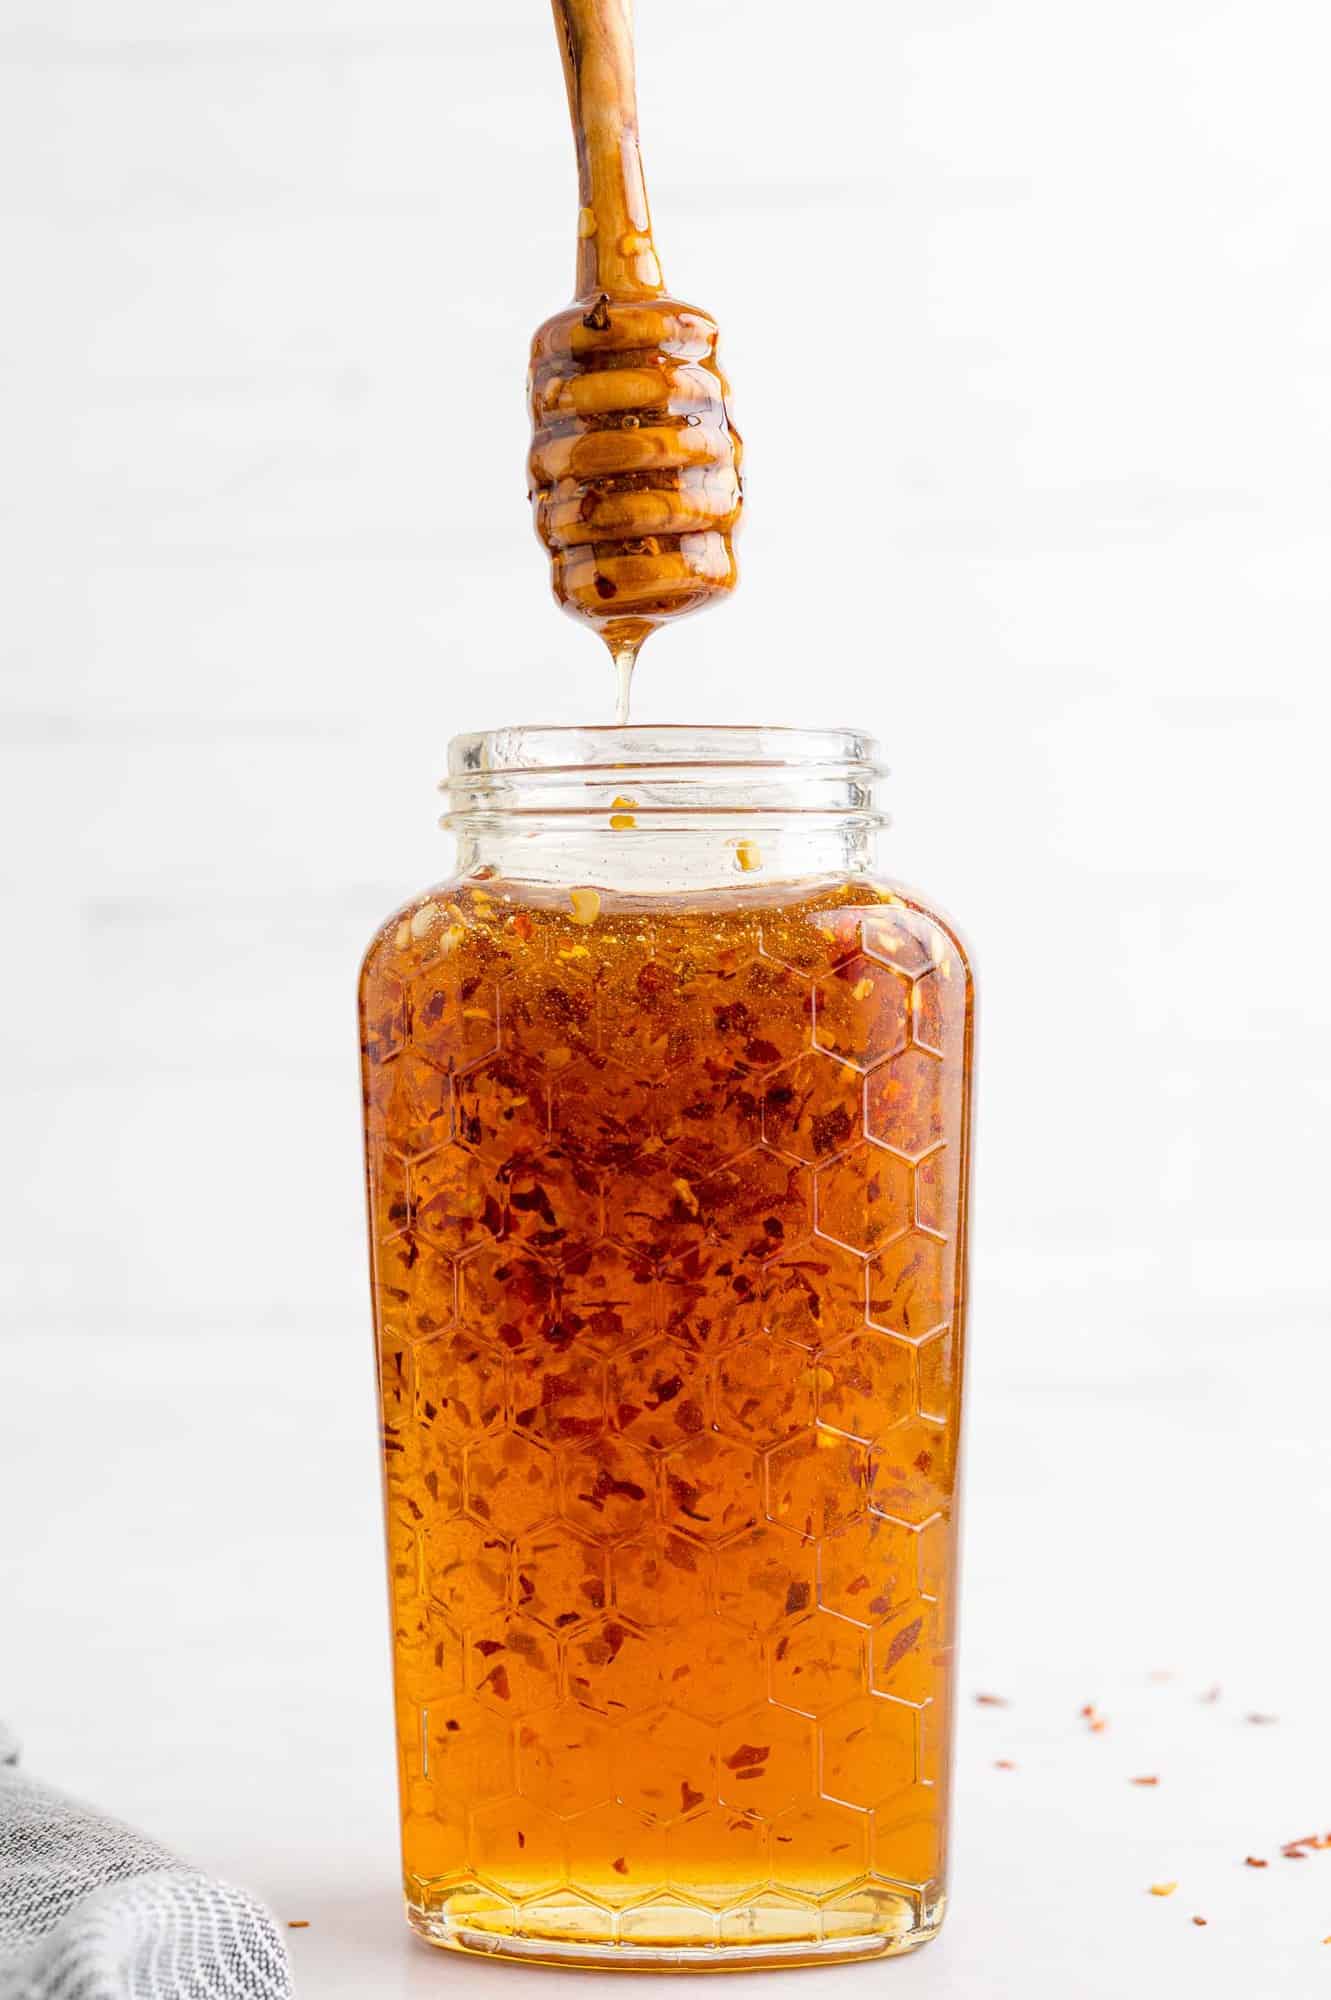 Hot honey in a jar with a honey dipper being lifted out.